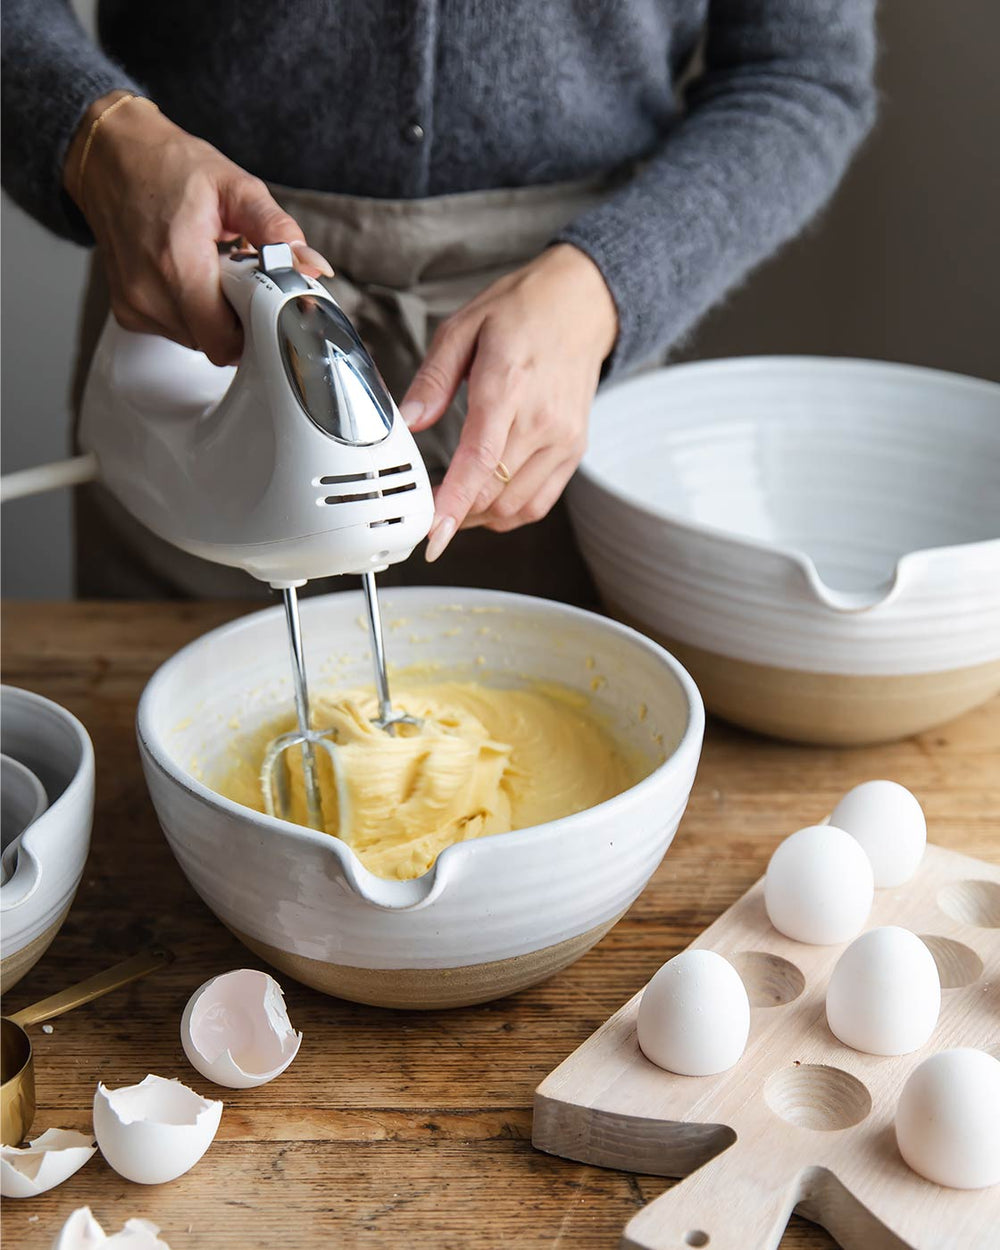 A mixer beats batter in a large pantry bowl next to a tray of eggs